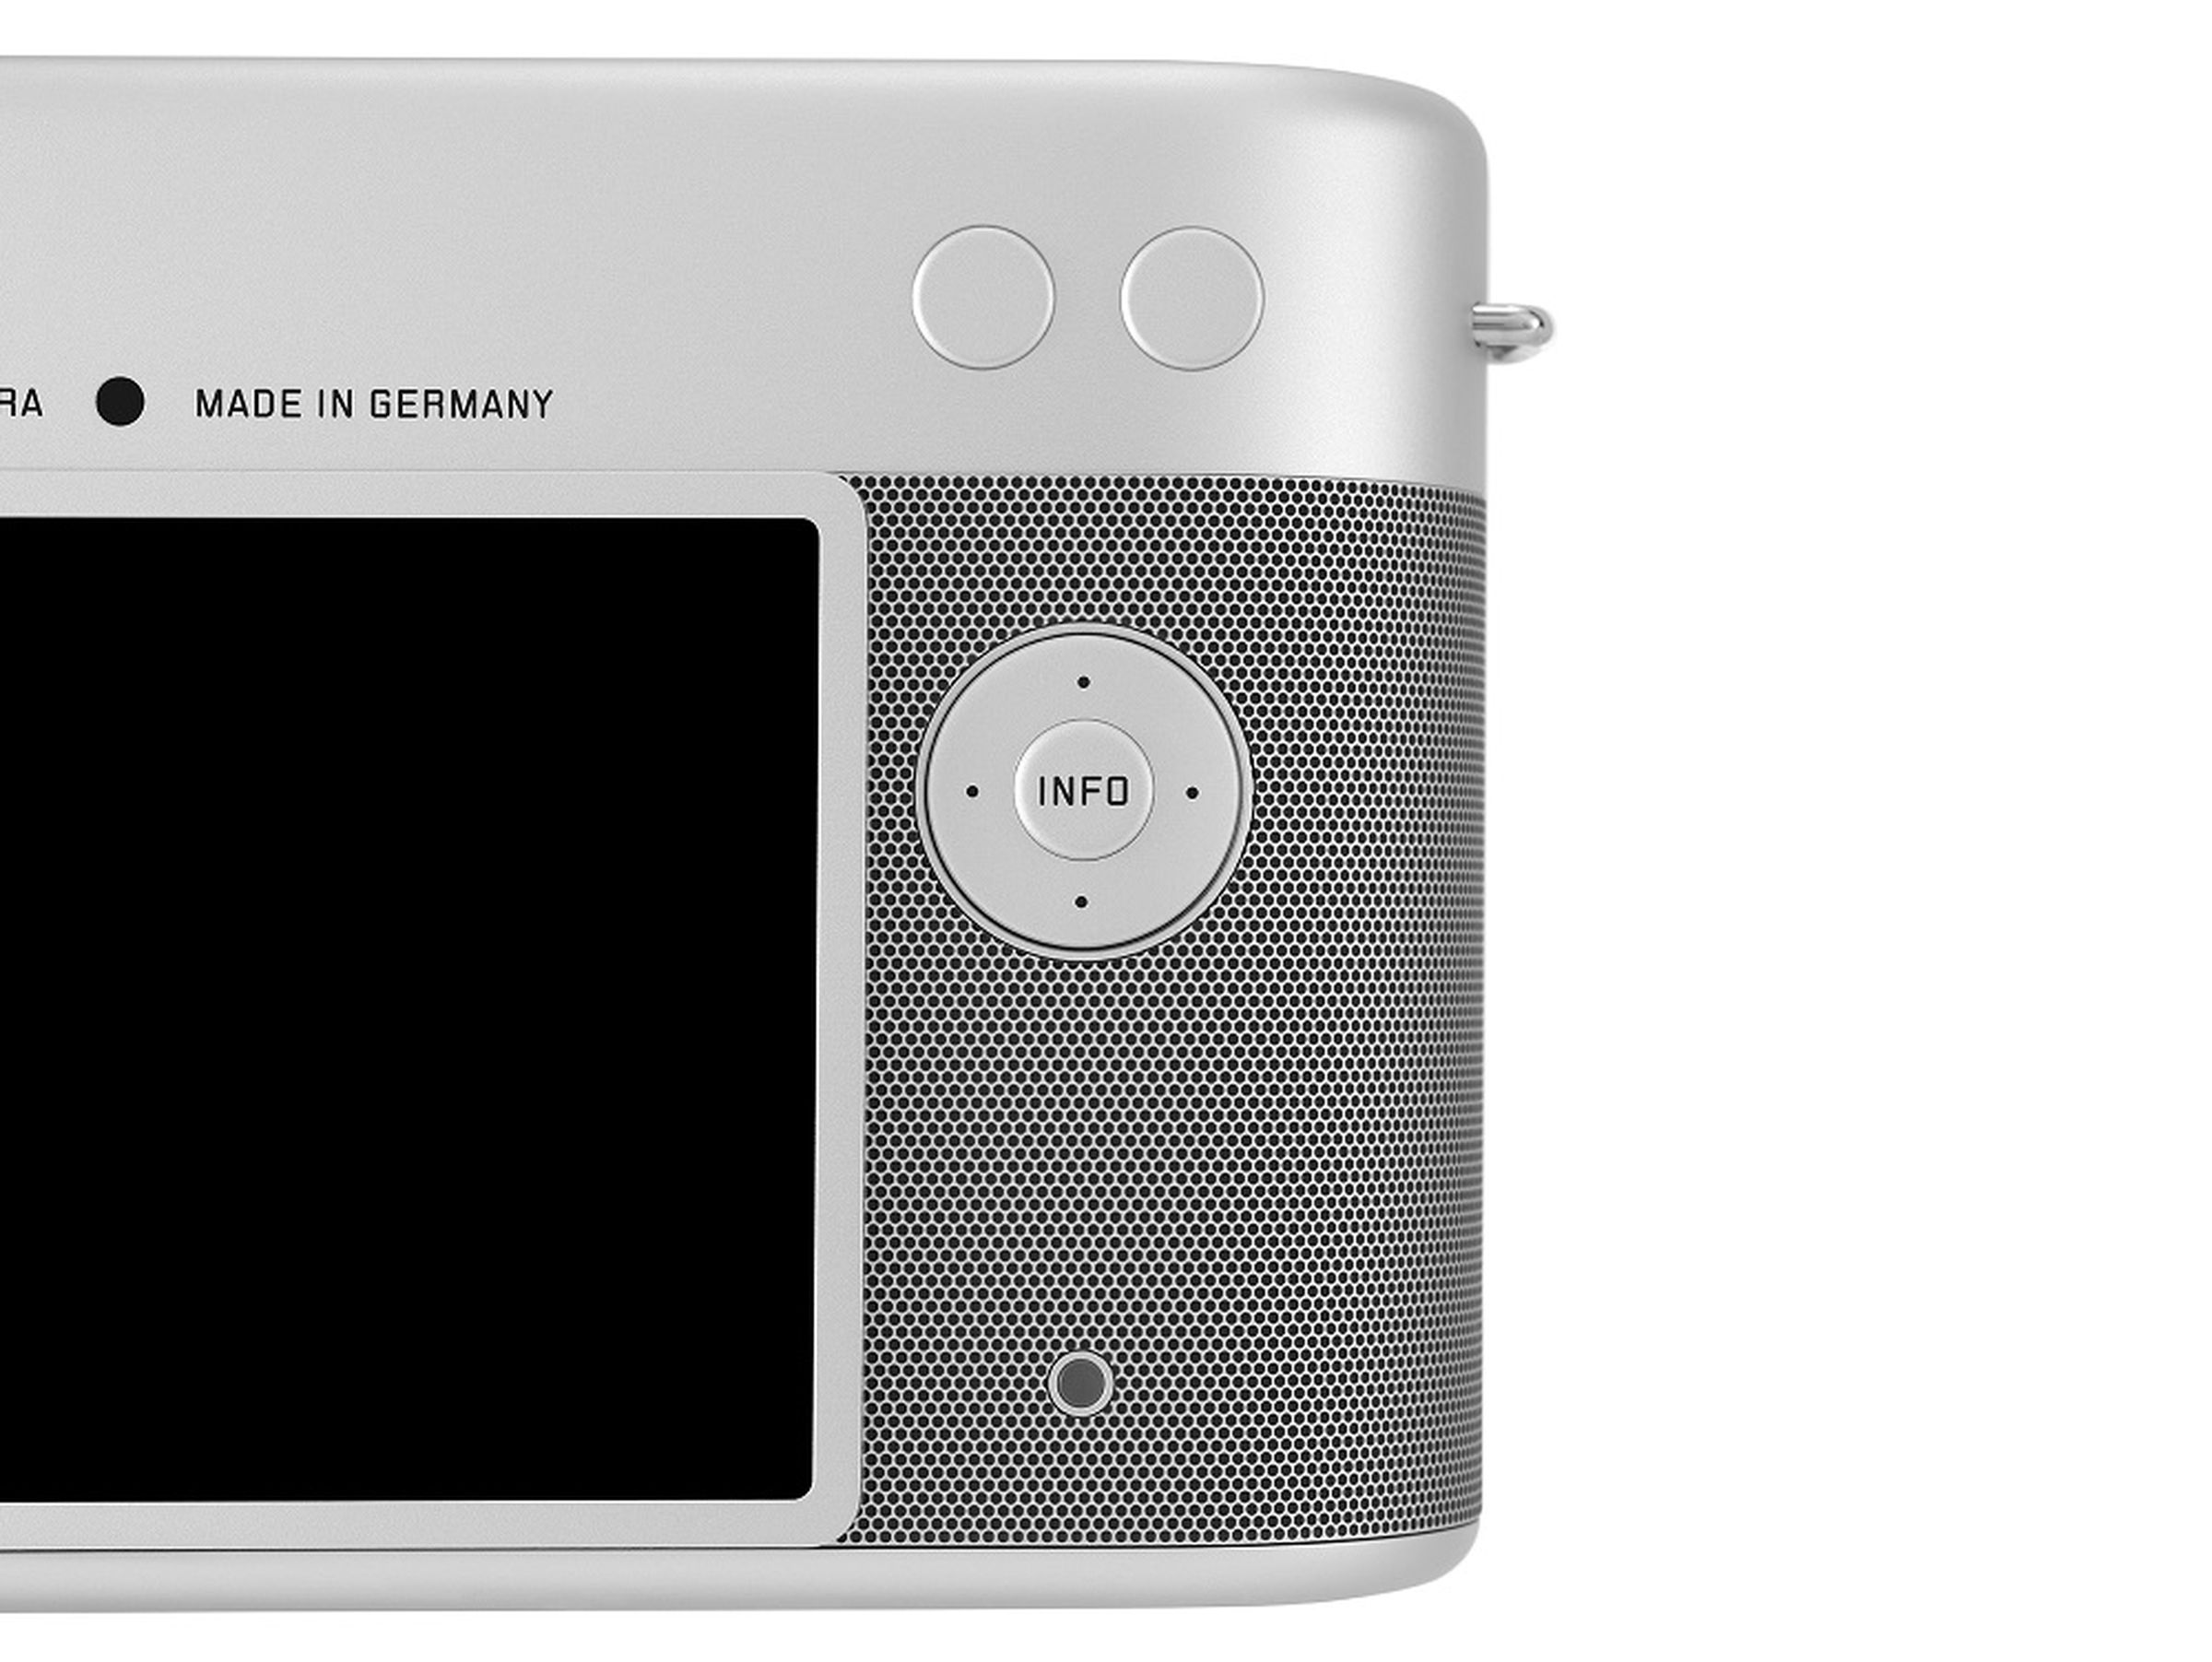 Leica M camera designed by Jony Ive and Marc Newson